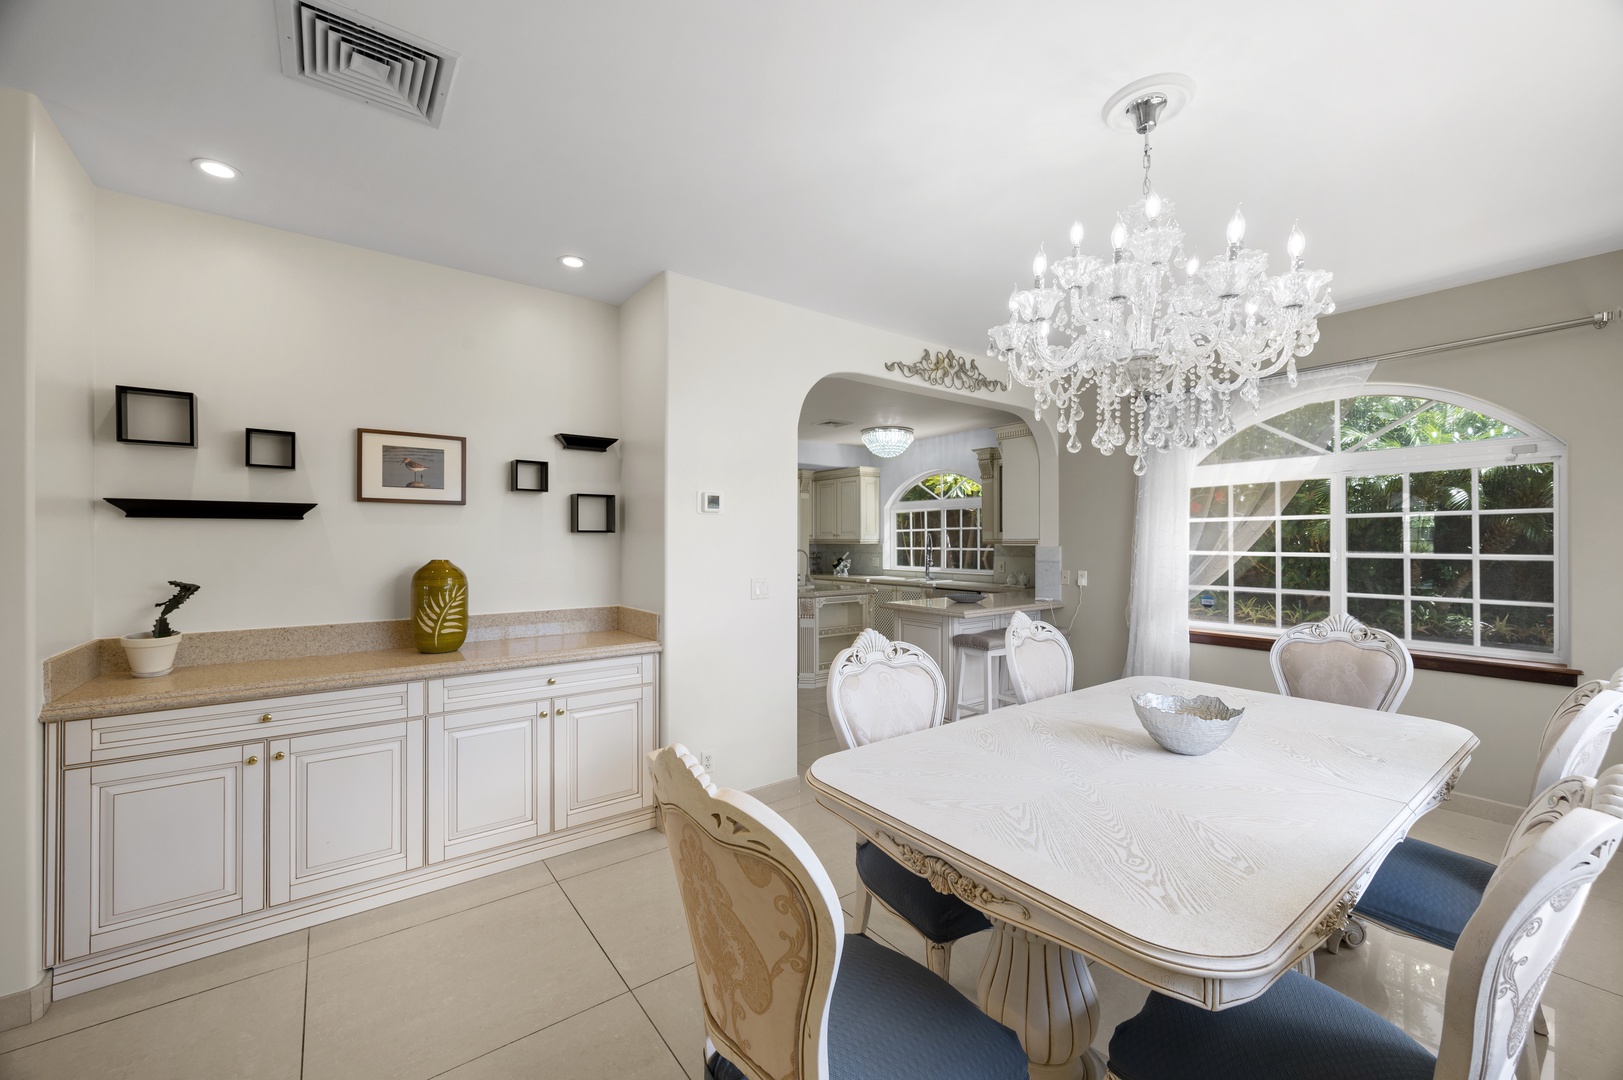 Honolulu Vacation Rentals, Lotus on a Hill* - Just imagine enjoying a your dinner feast in this gorgeous dining area